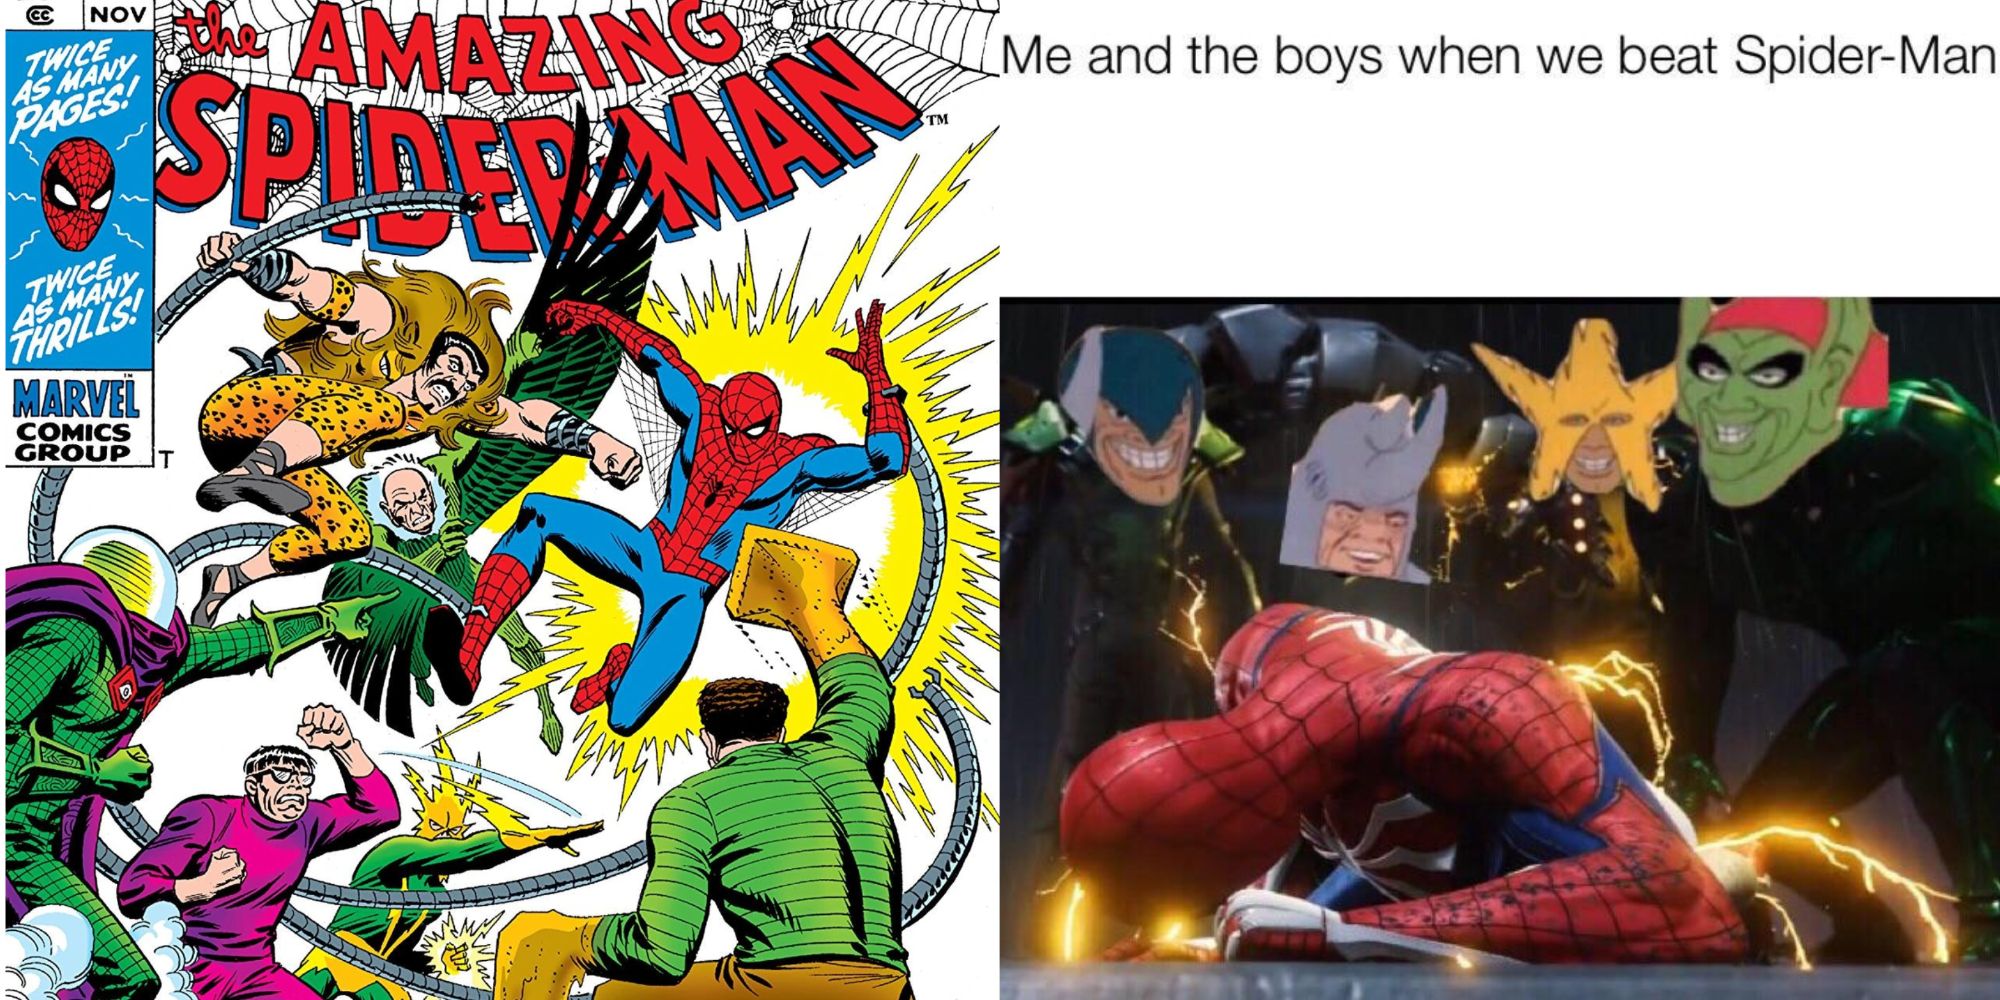 The Sinister Six beat up Spider-Man